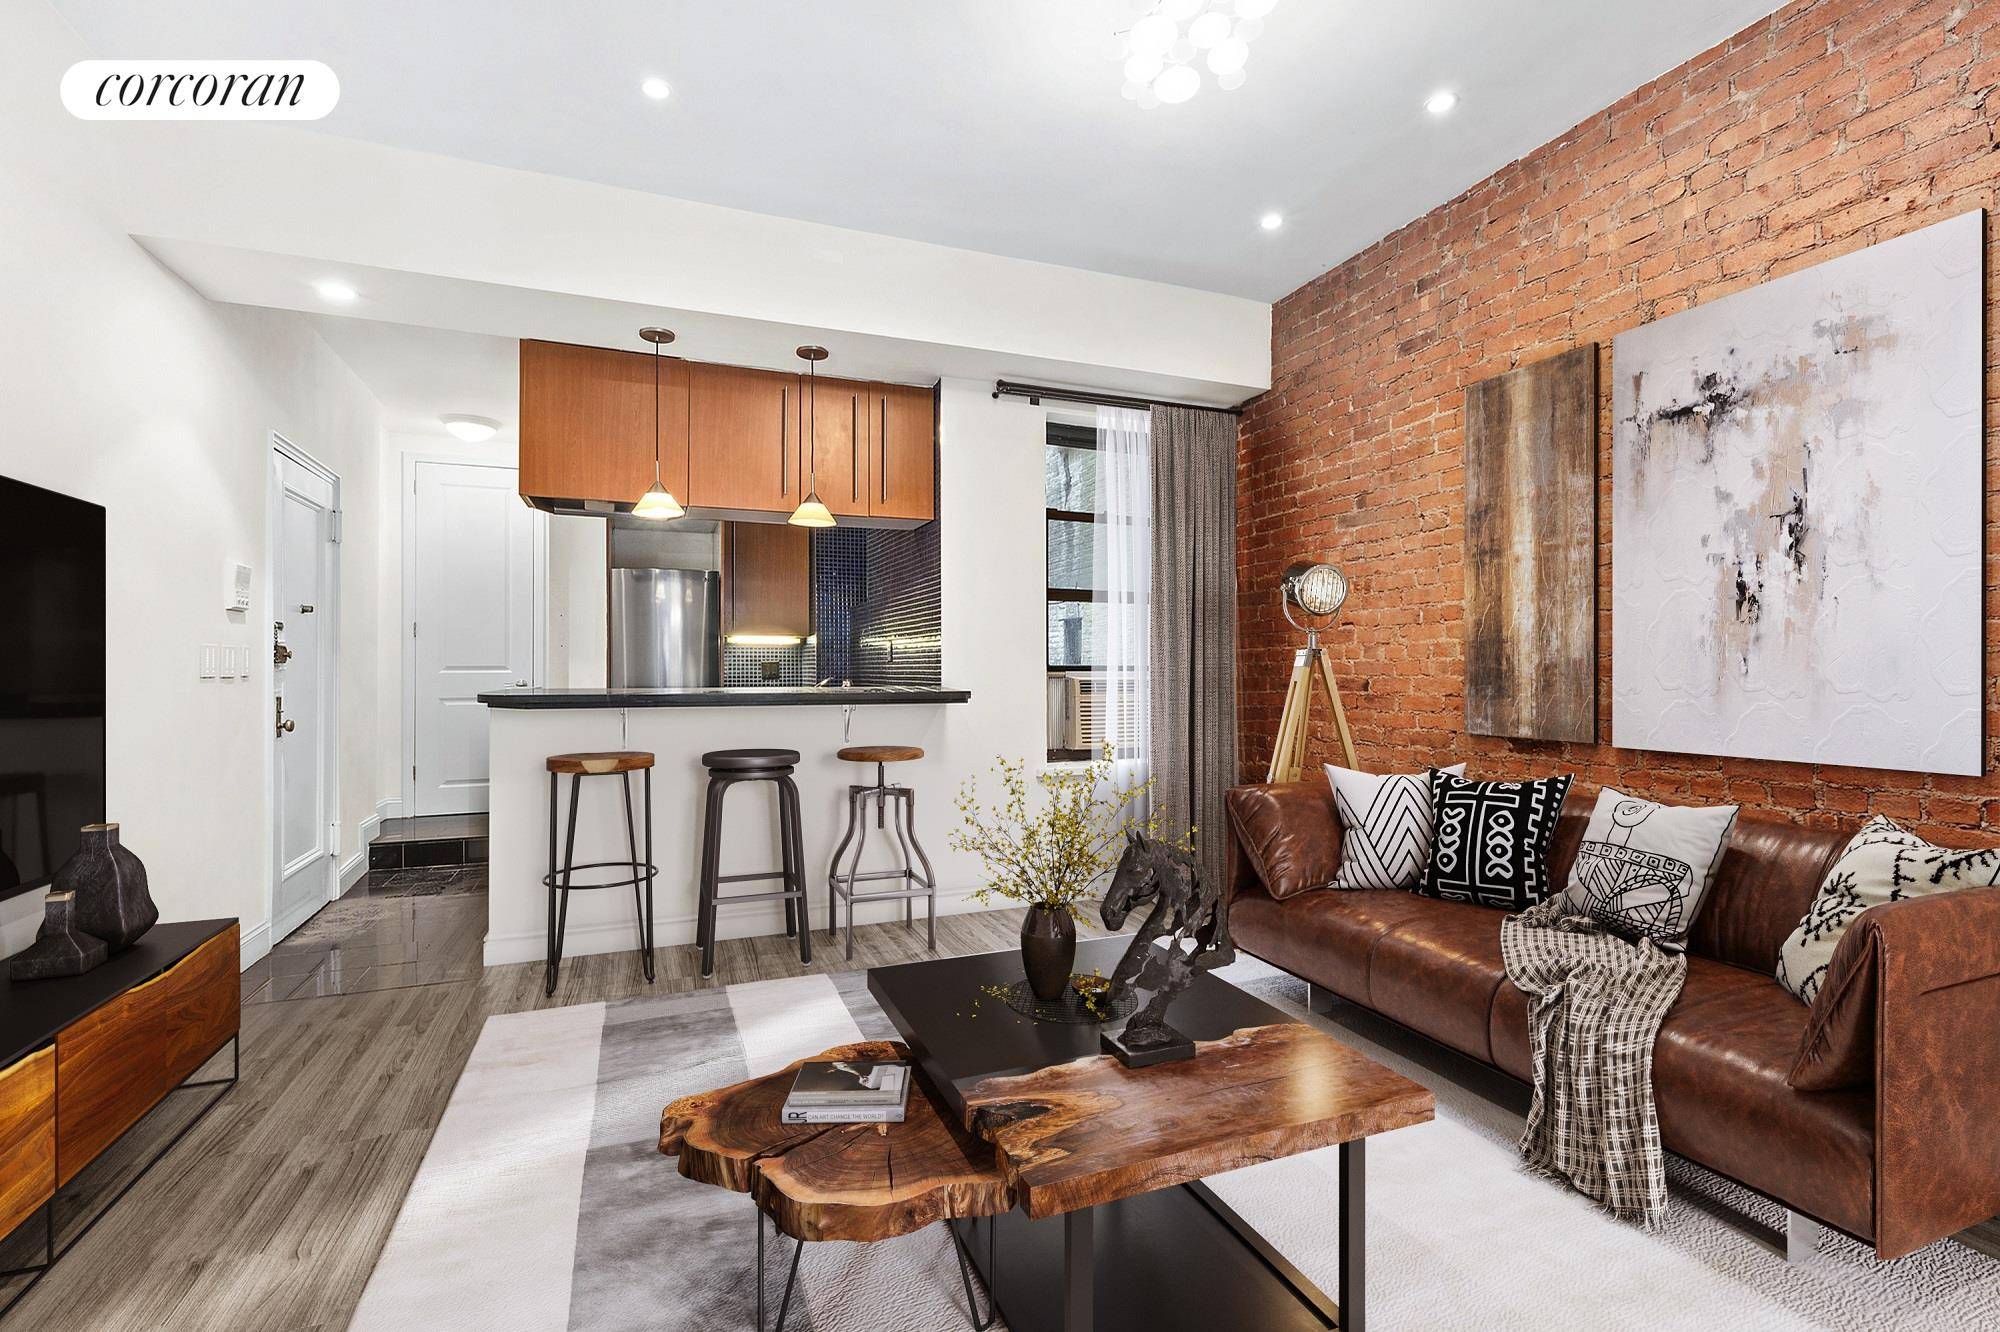 Priced to sell ! Welcome to this beautiful and unique 1BR 1BA at 133 East 30th Street, a boutique coop building on a tree lined street in Murray Hill Kips ...